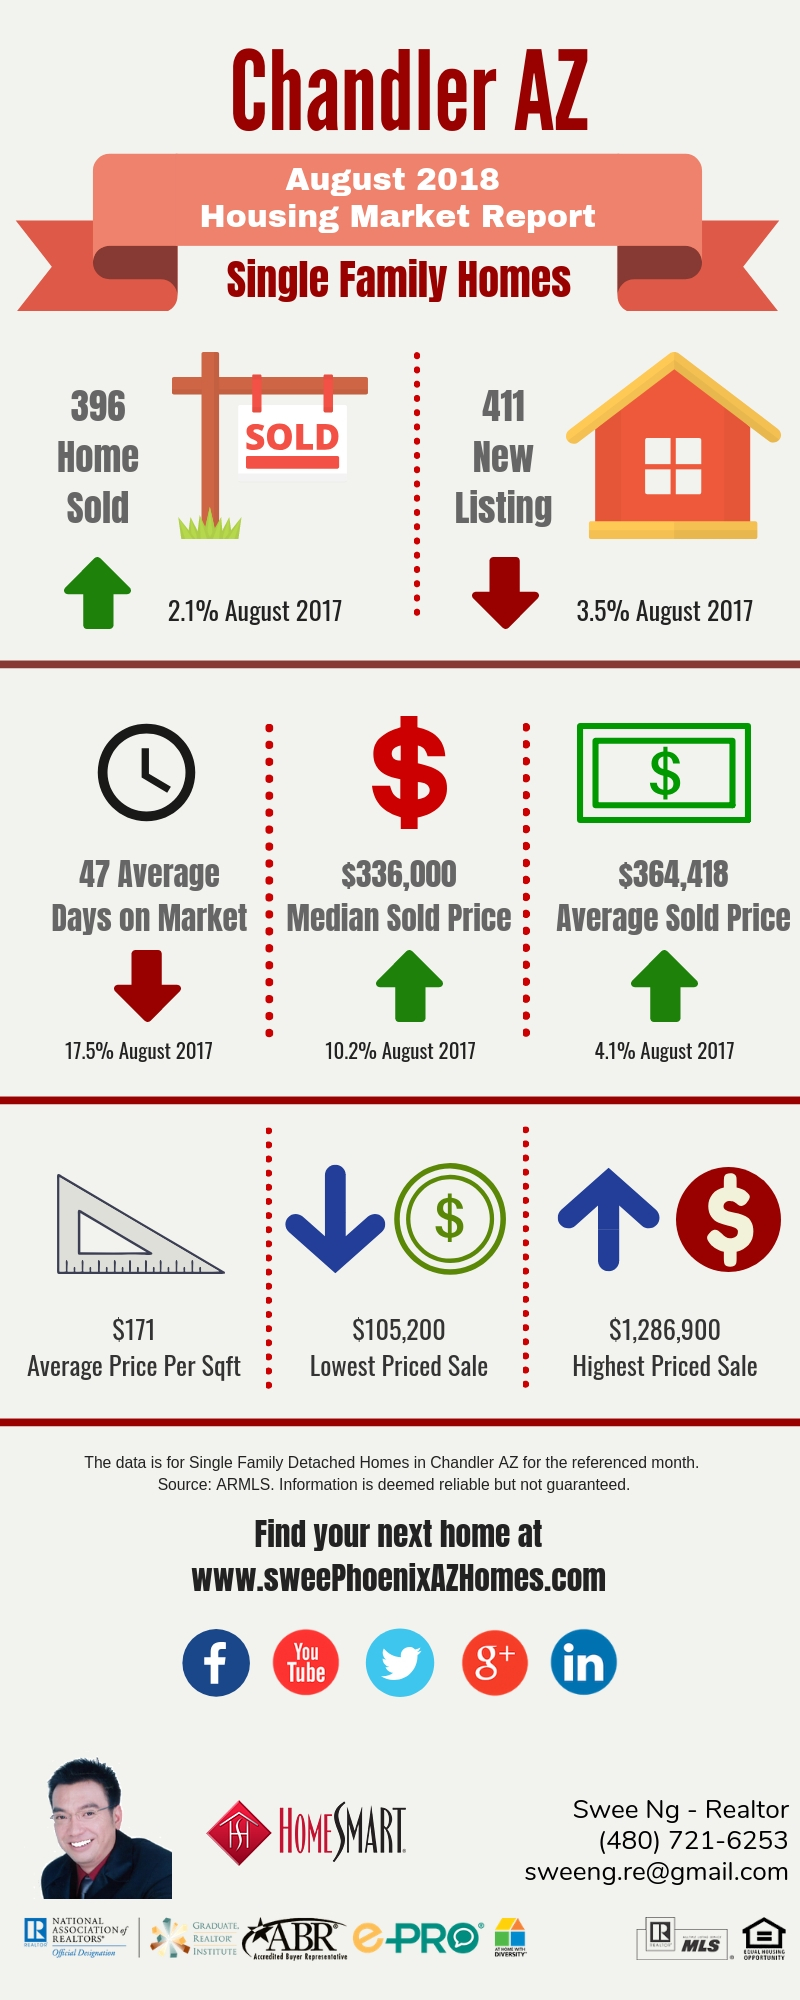 Chandler AZ Housing Market Update August 2018 by Swee Ng, House Value and Real Estate Listings